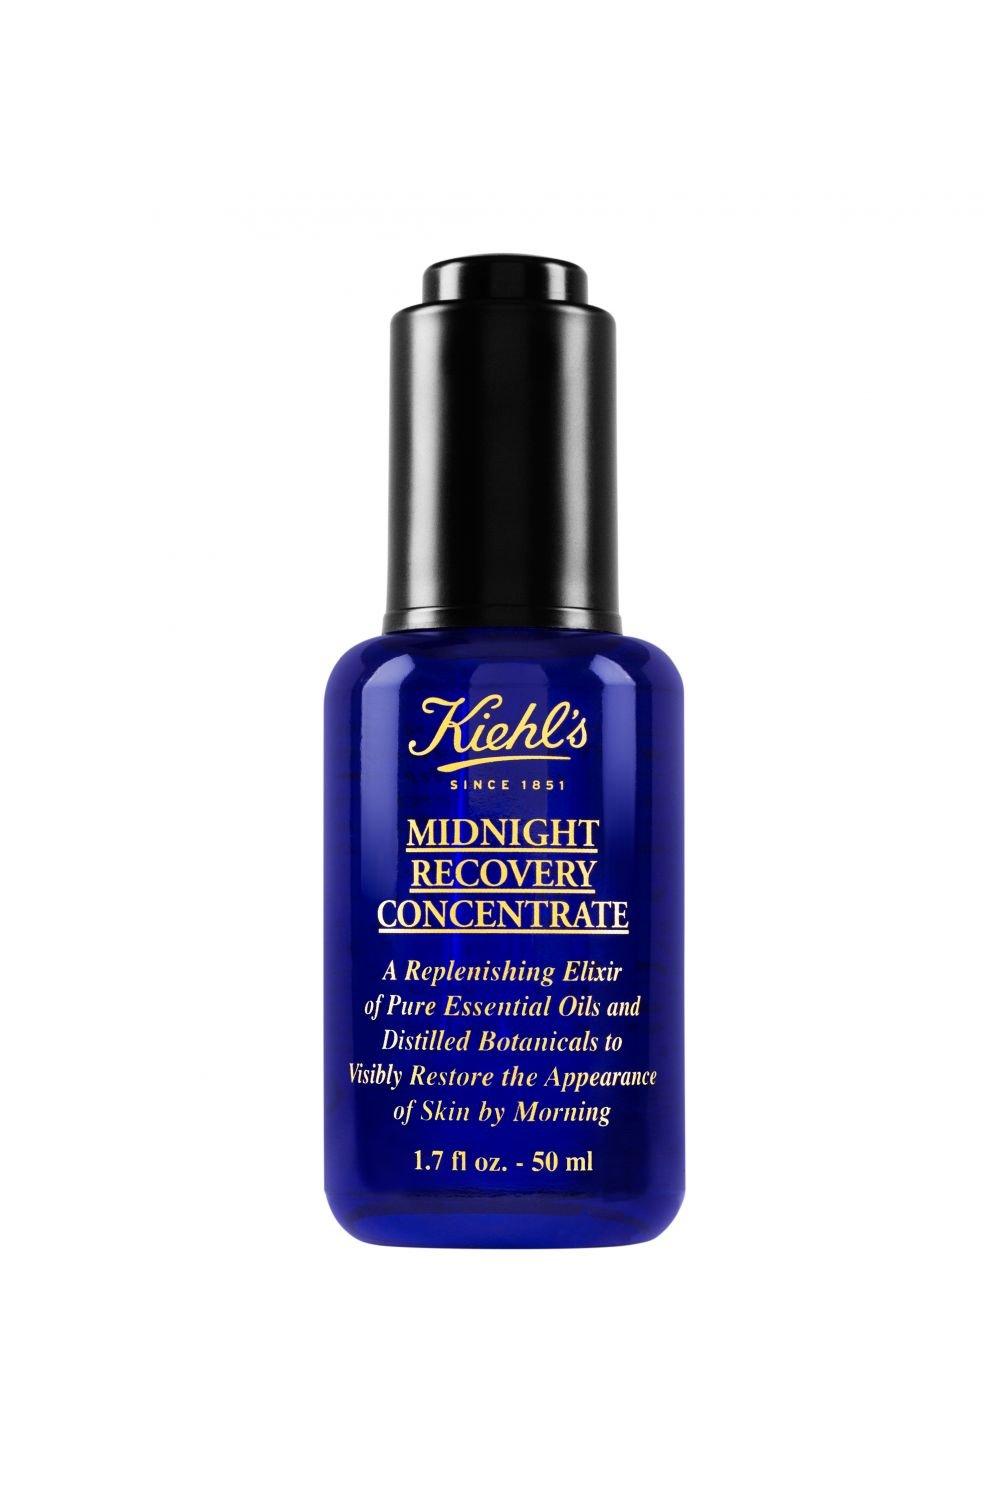 Image of Kiehl's Midnight Recovery Concentrate - 50ml